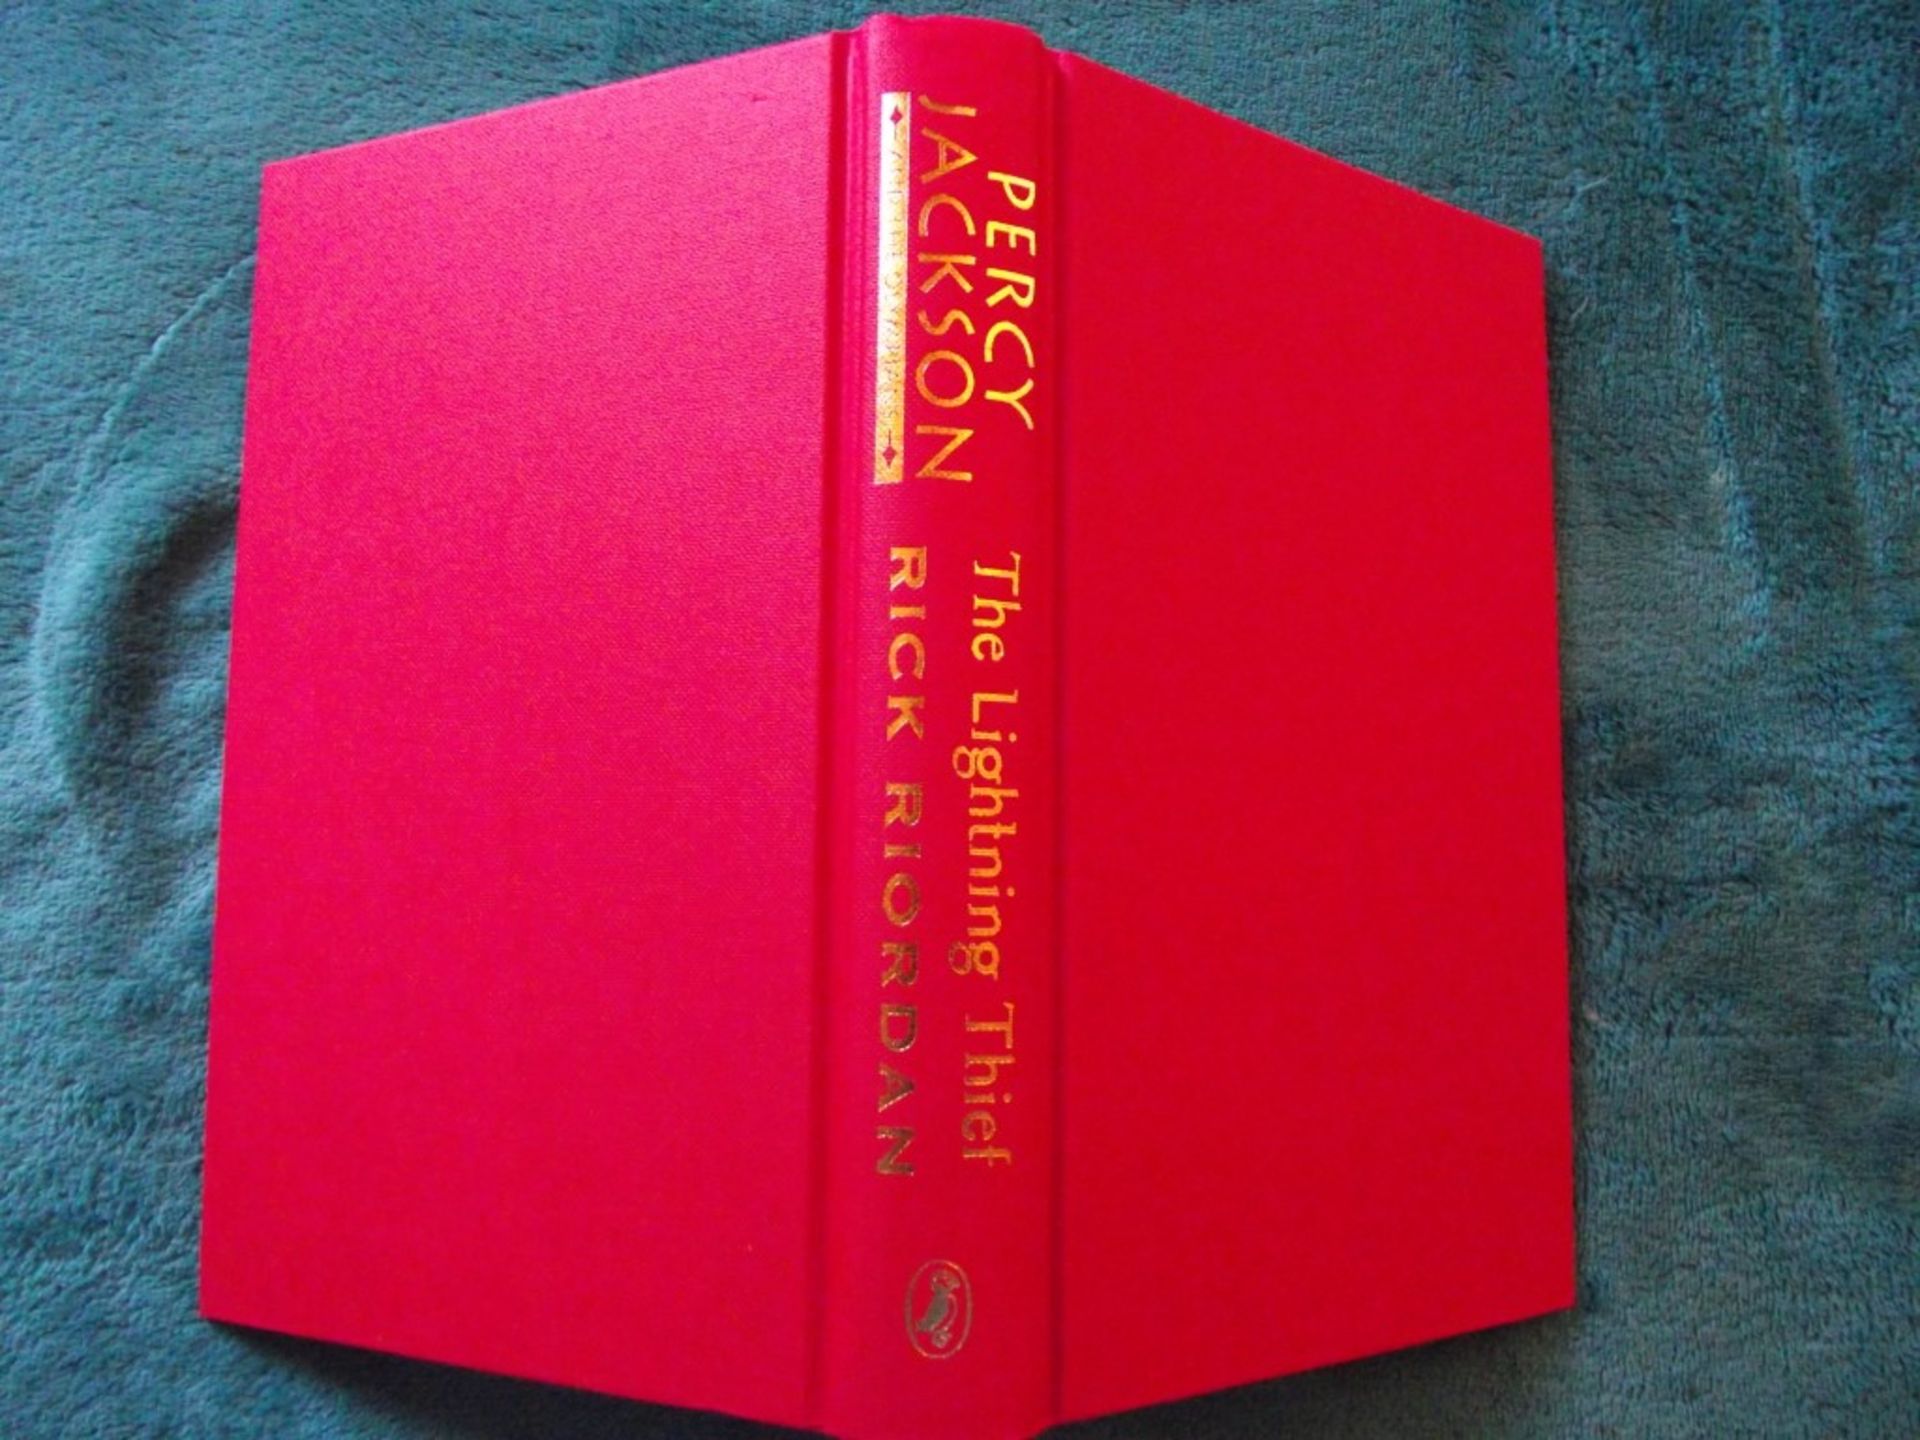 Percy Jackson The Lightning Thief By Rick Riordan - Puffin 2005 - Signed - Image 12 of 12